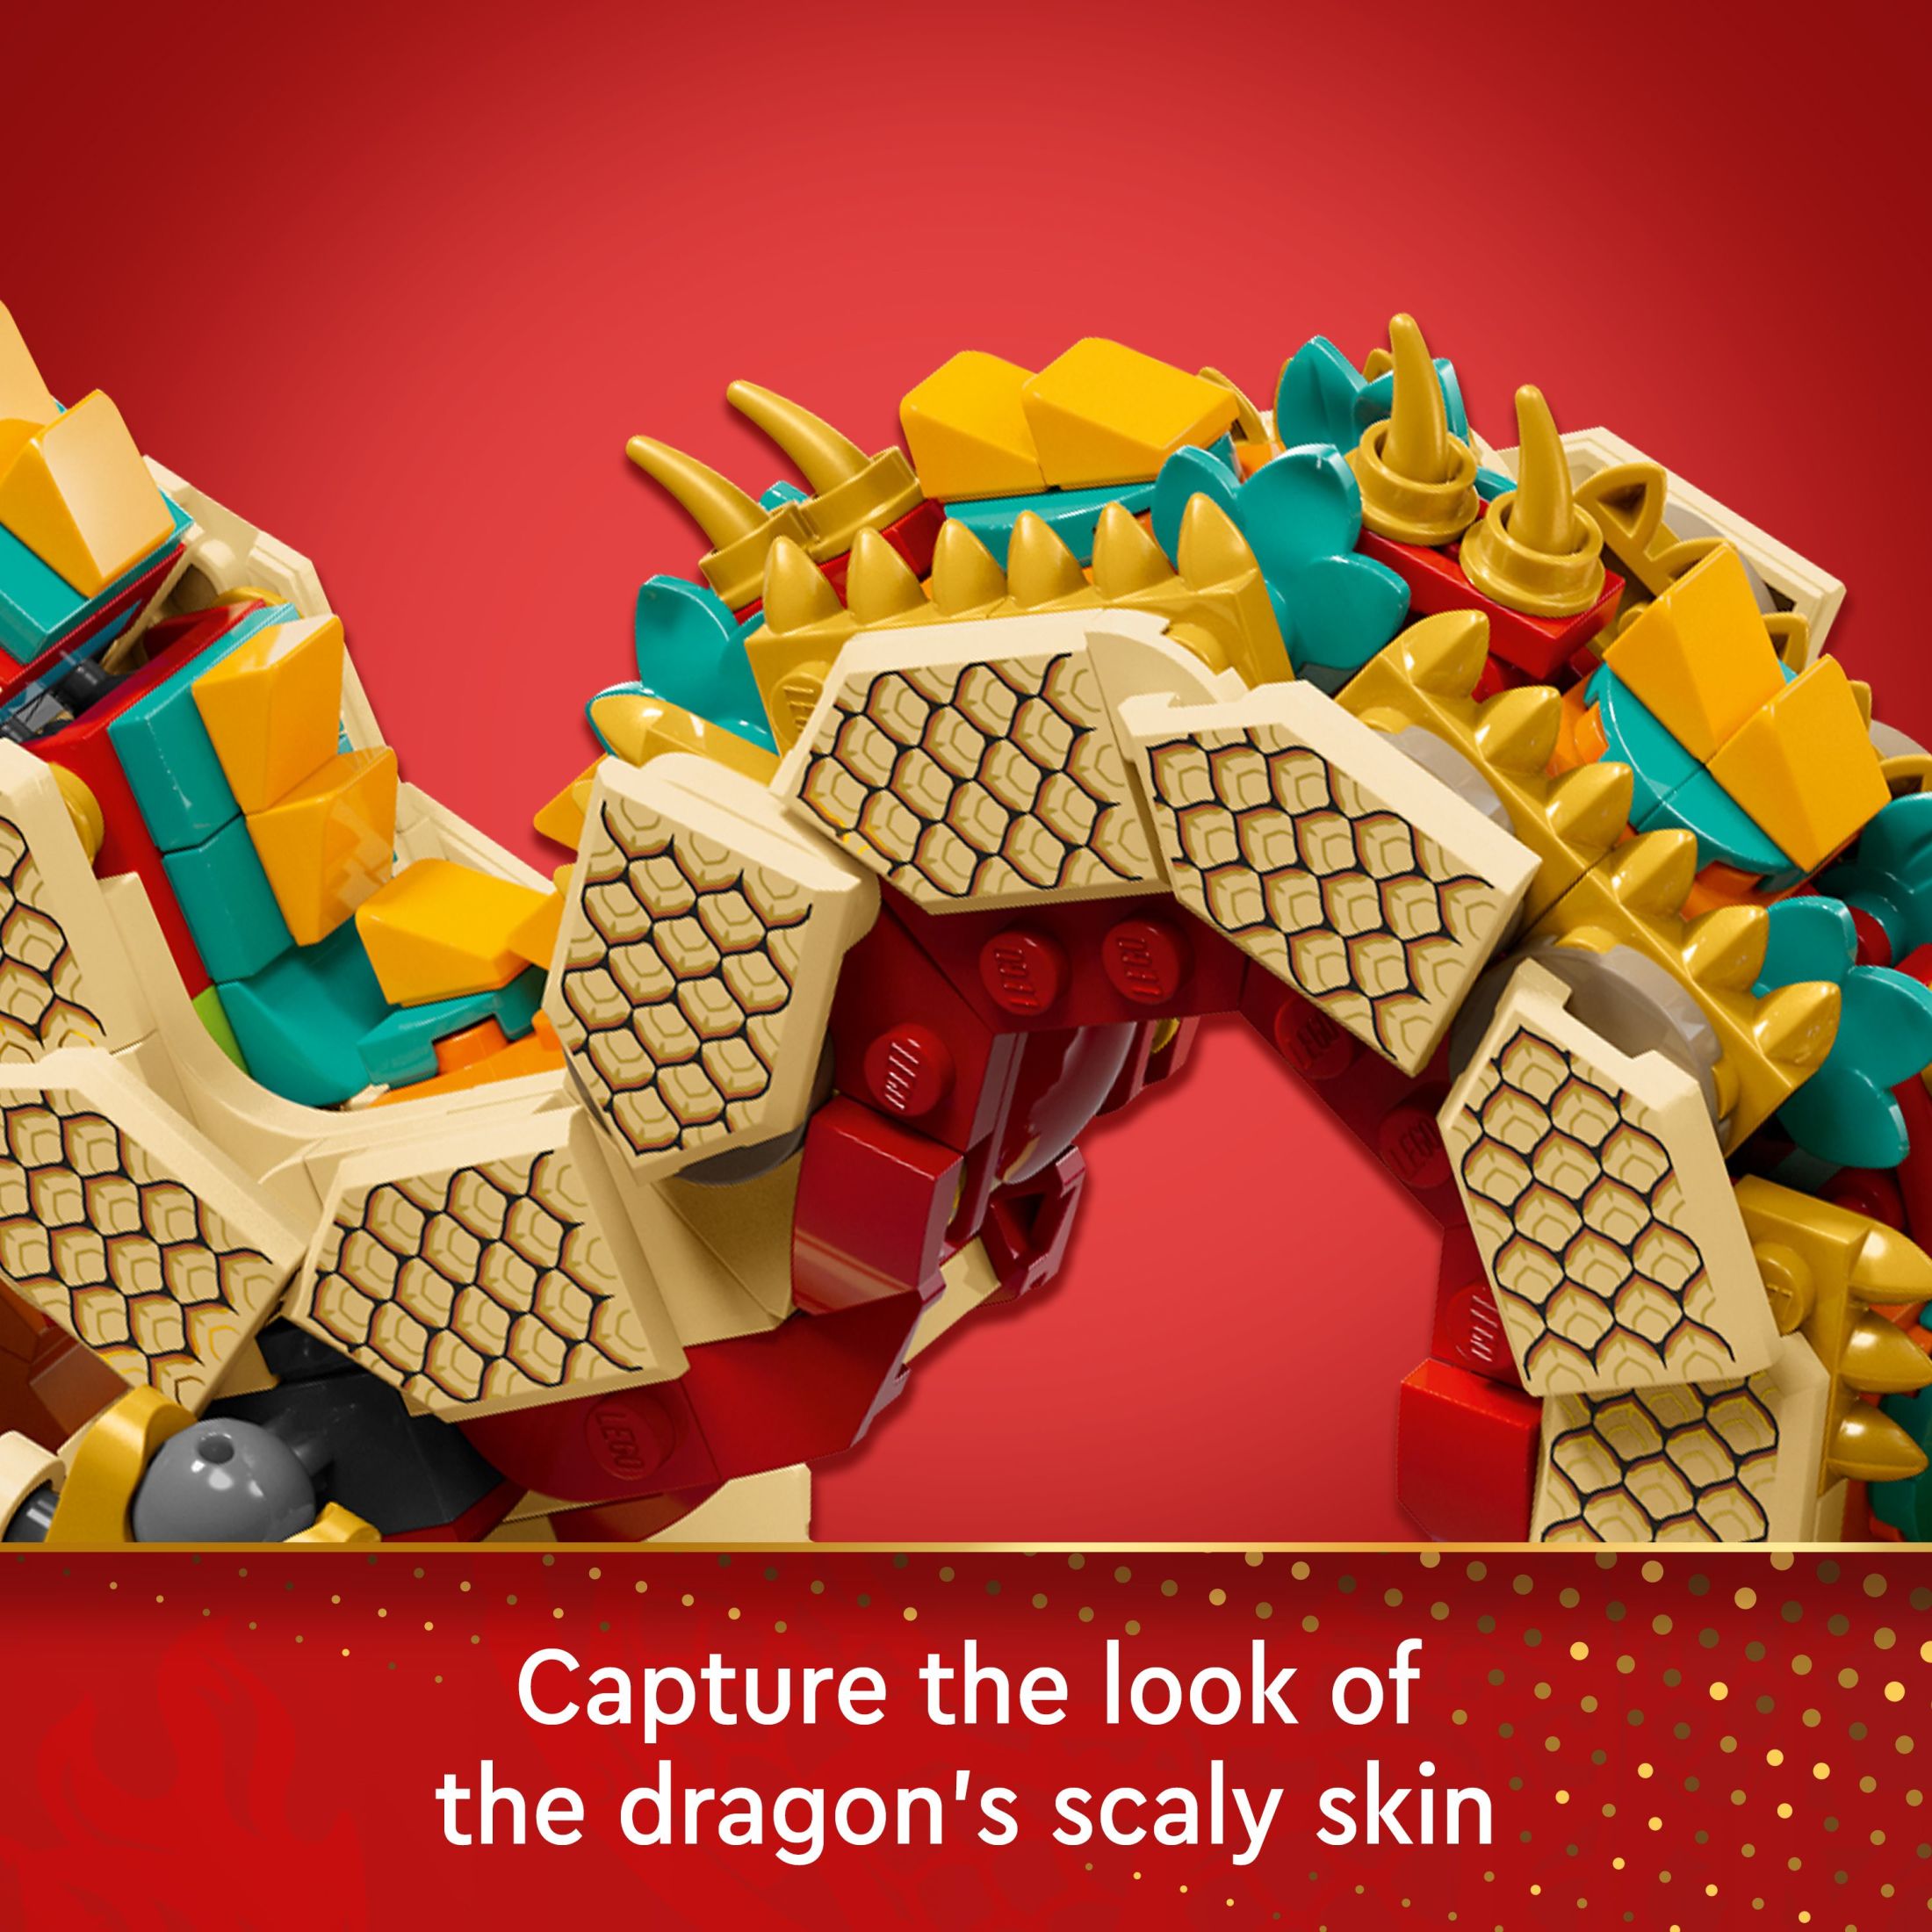 LEGO Spring Festival Auspicious Dragon Buildable Figure, Educational Toy for Kids, Dragon Toy Building Set, Great Spring Festival Decoration or Unique Gift for Boys and Girls Ages 10 and Up, 80112 - image 5 of 9